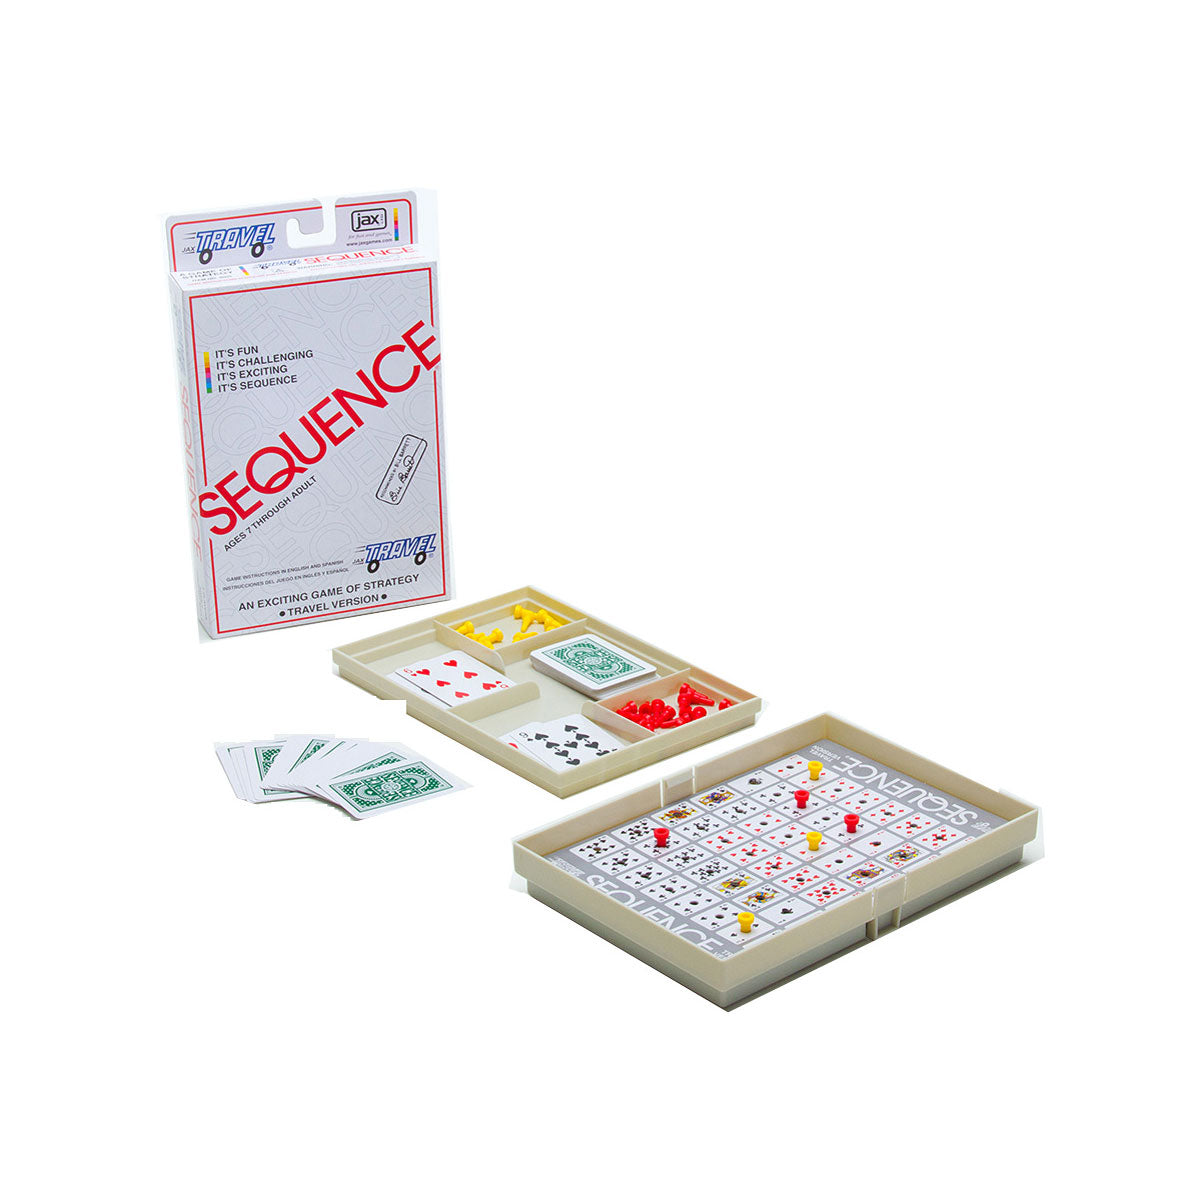 Sequence Travel Edition from Jax/Goliath Games